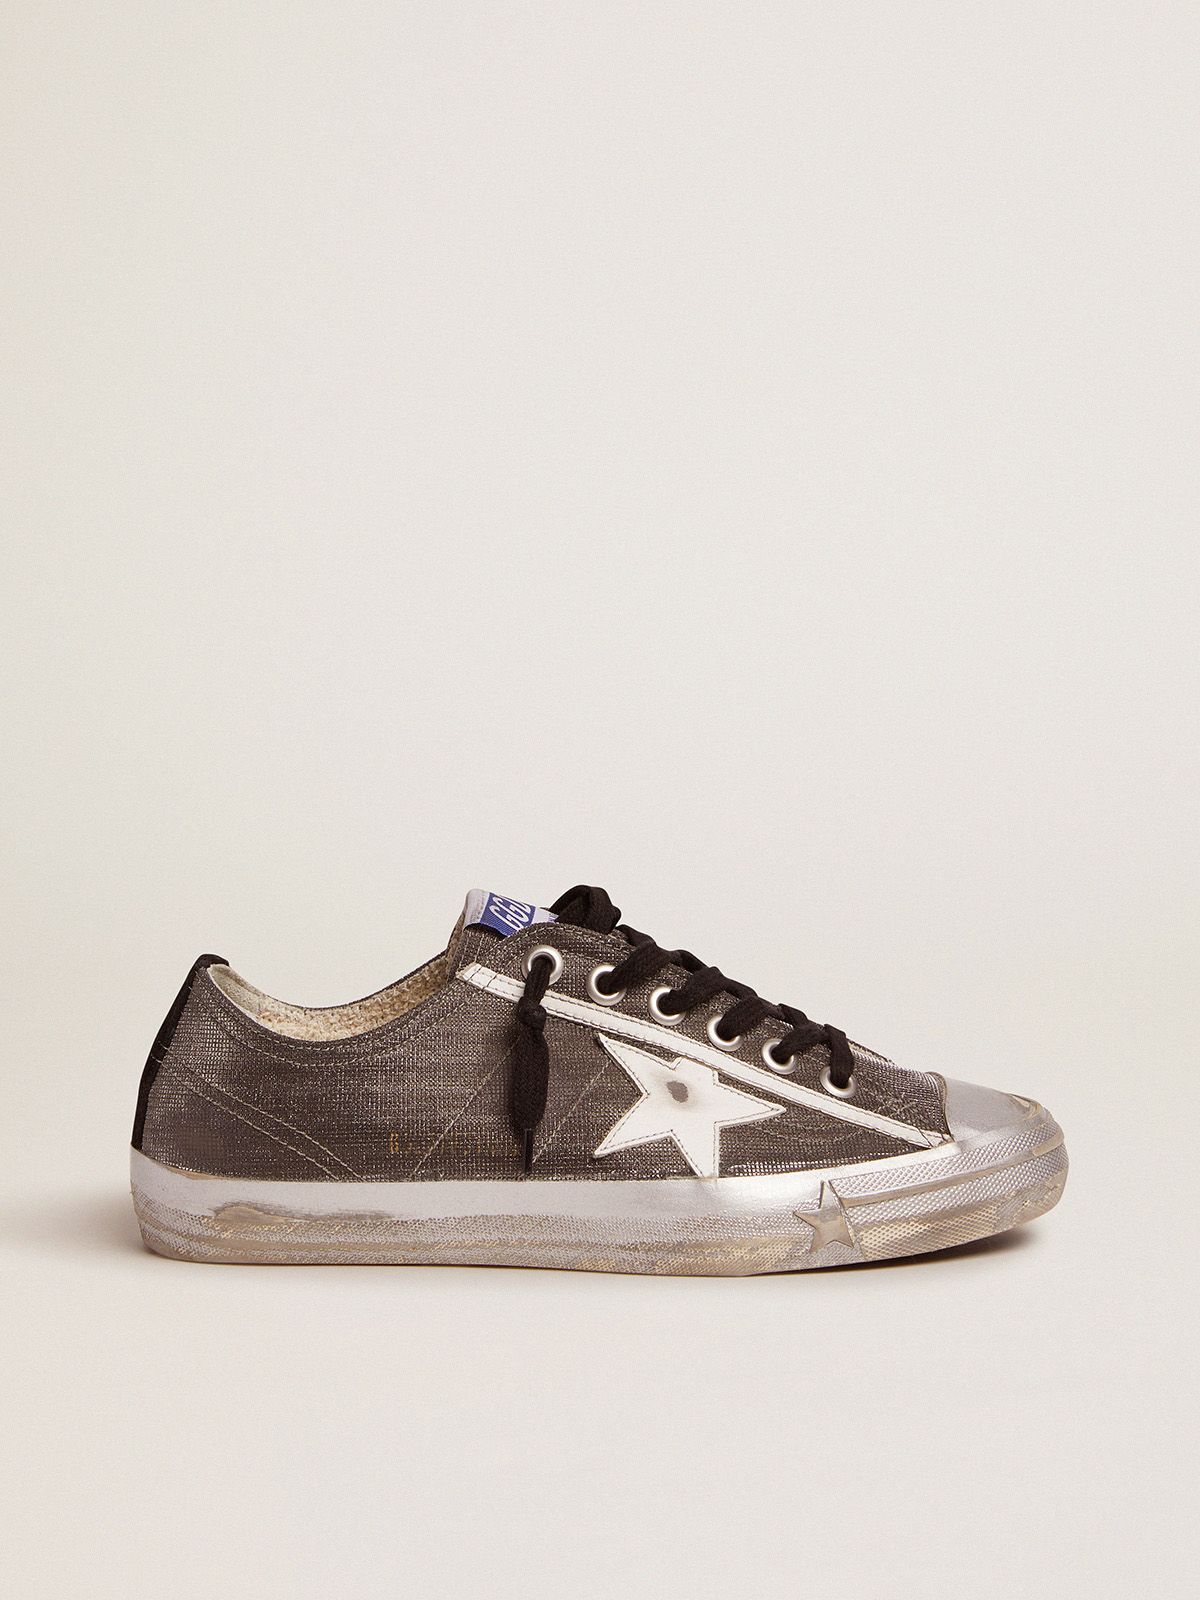 golden goose checkered Dark white and sneakers with gray pattern LTD V-Star star